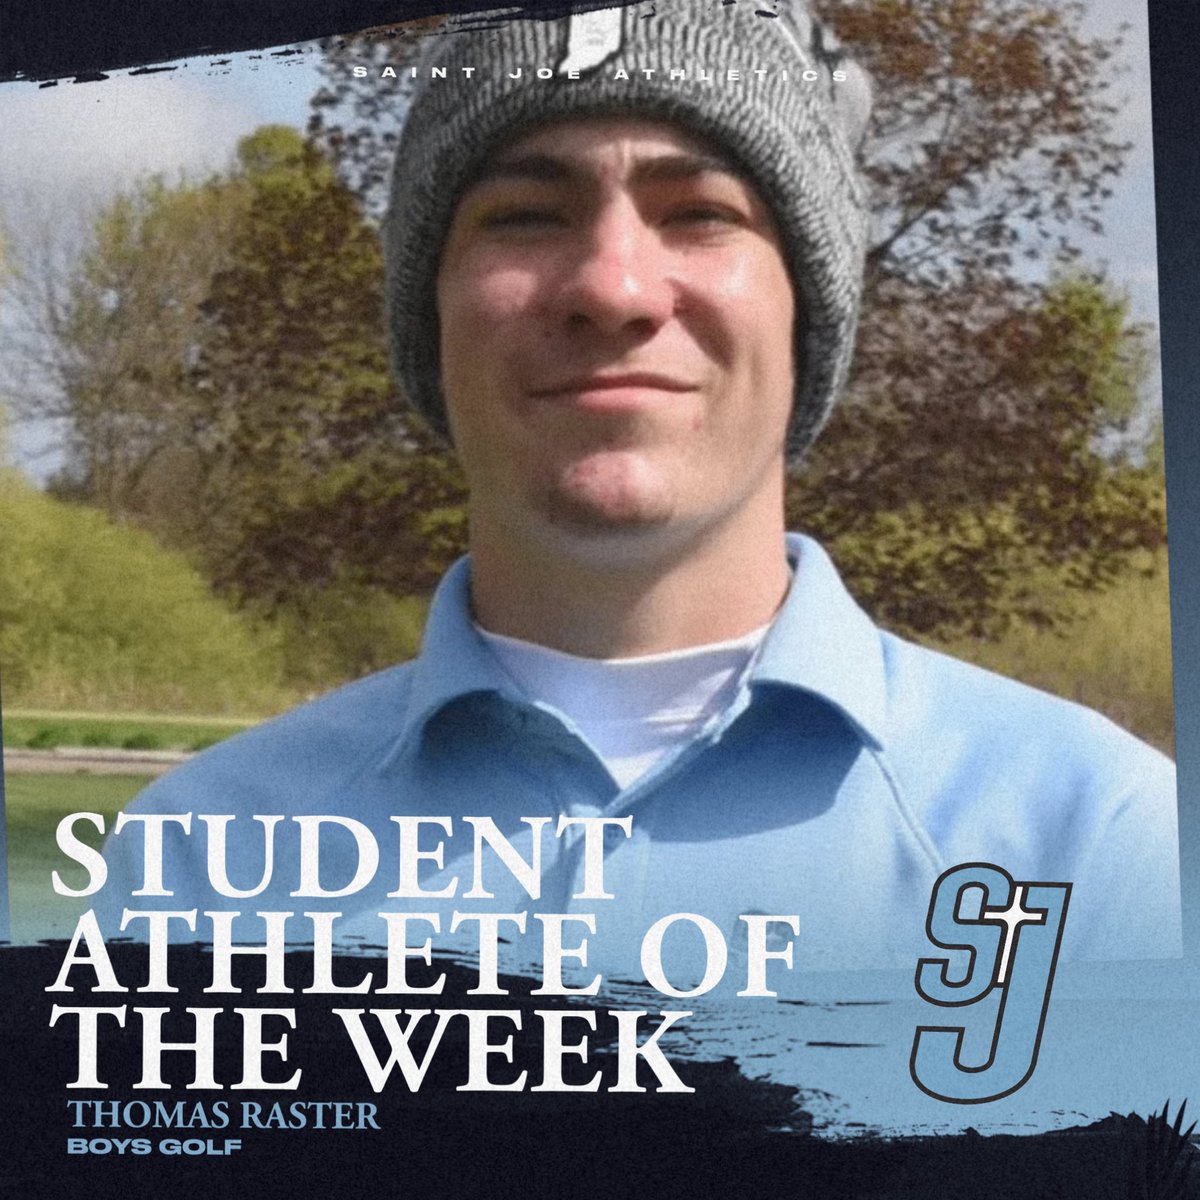 Congrats to Thomas Raster on being our Student-Athlete of the Week. Raster was instrumental in four wins for the Huskies last week. He shot 35 and 36 in the nine-hole contests, followed by a 76 at the Benny Leonard Memorial Tournament Friday and a 74 at the Concord Invitational…